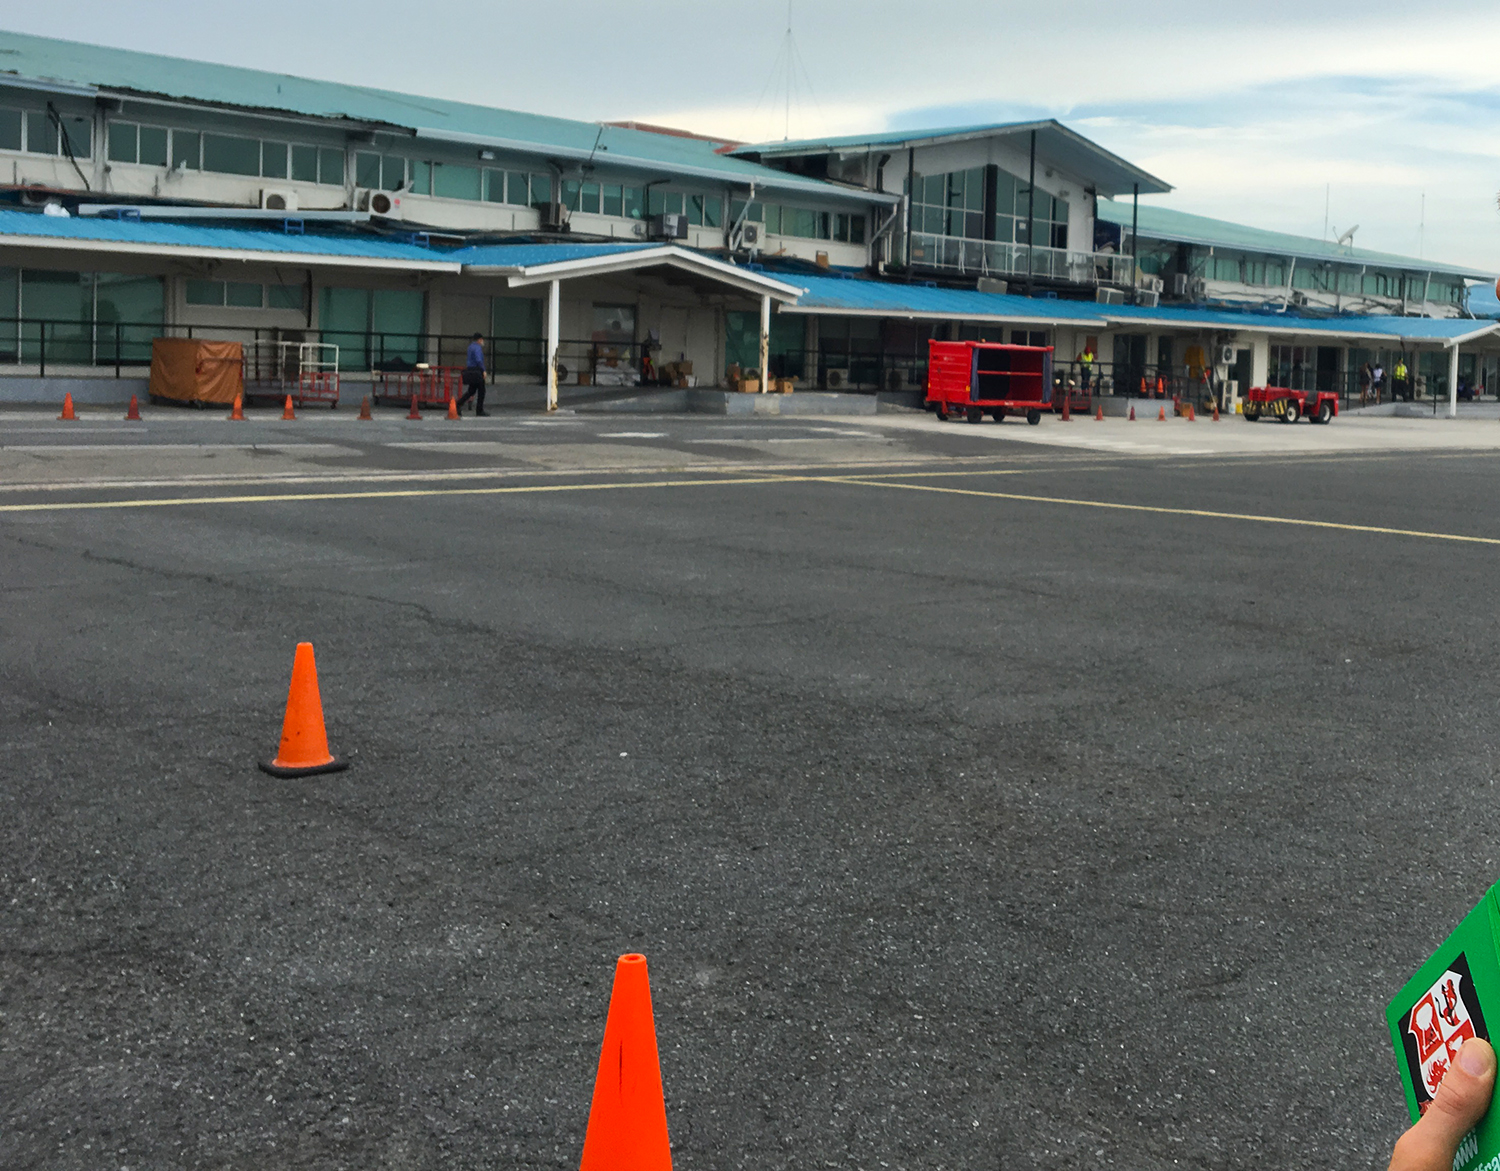 Albrook airport. I like to walk on runways, it gives me a retro travelling feel. 